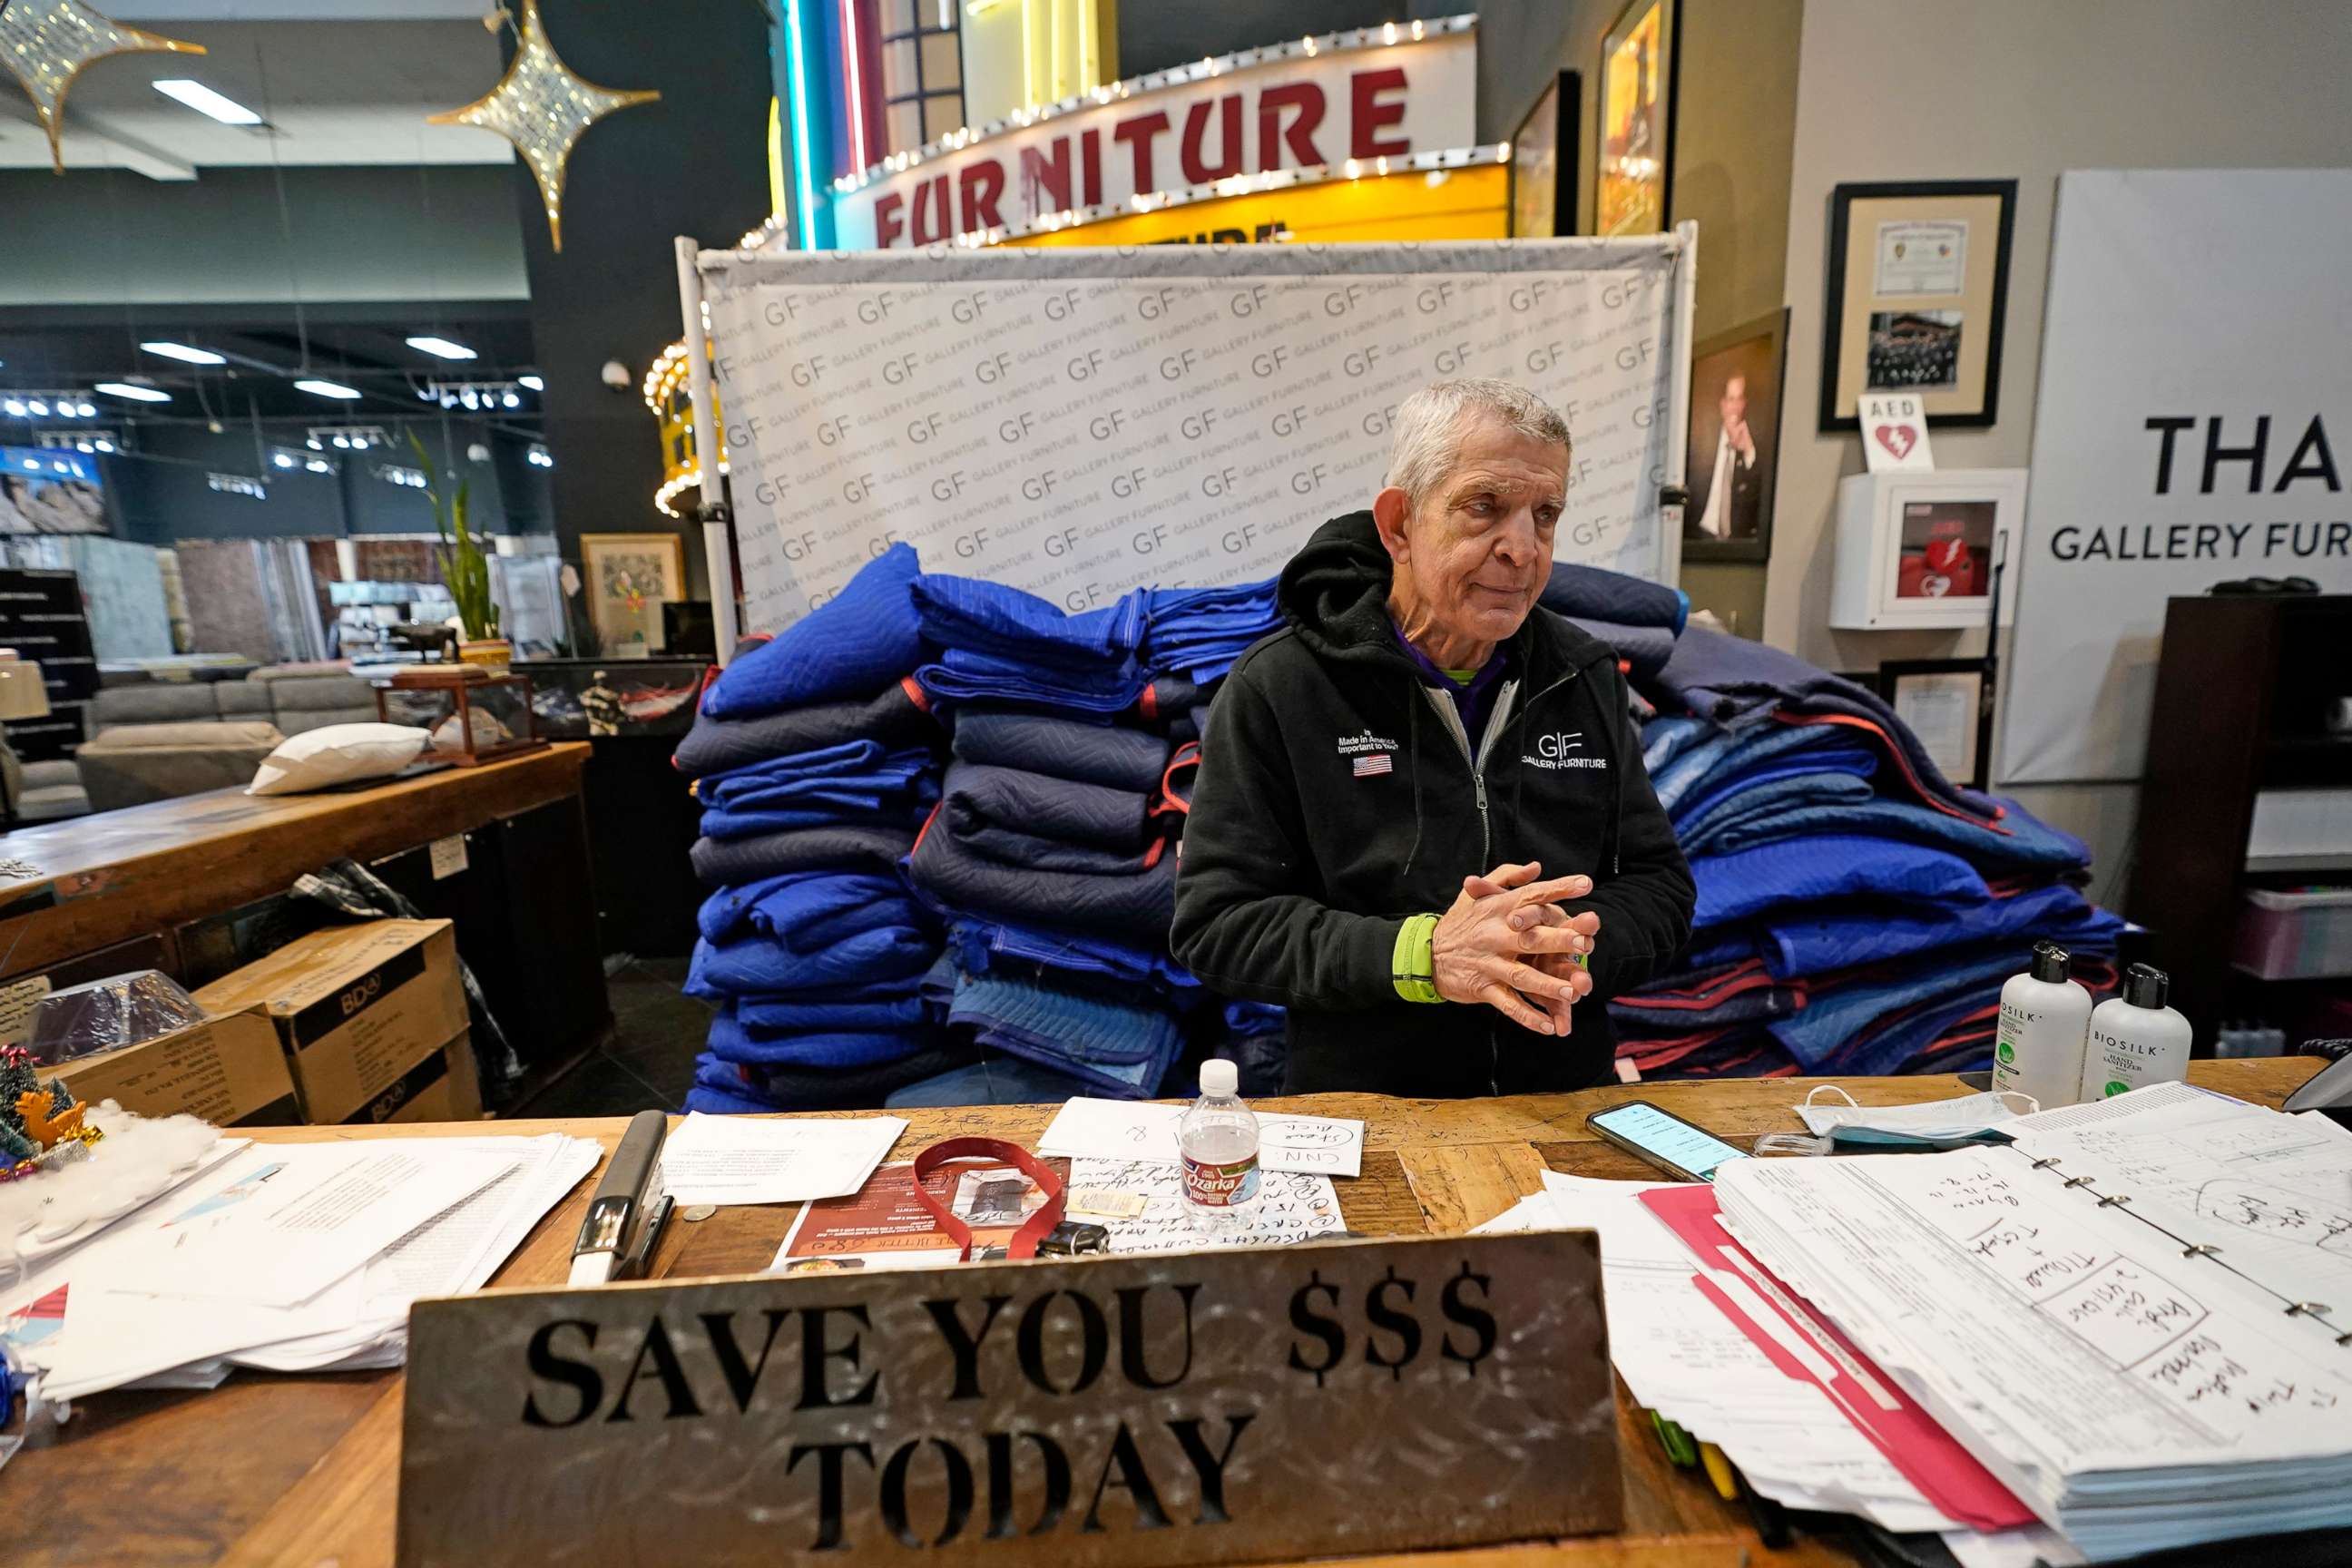 Houston furniture store owner opened his doors to people seeking warmth in  the winter storm